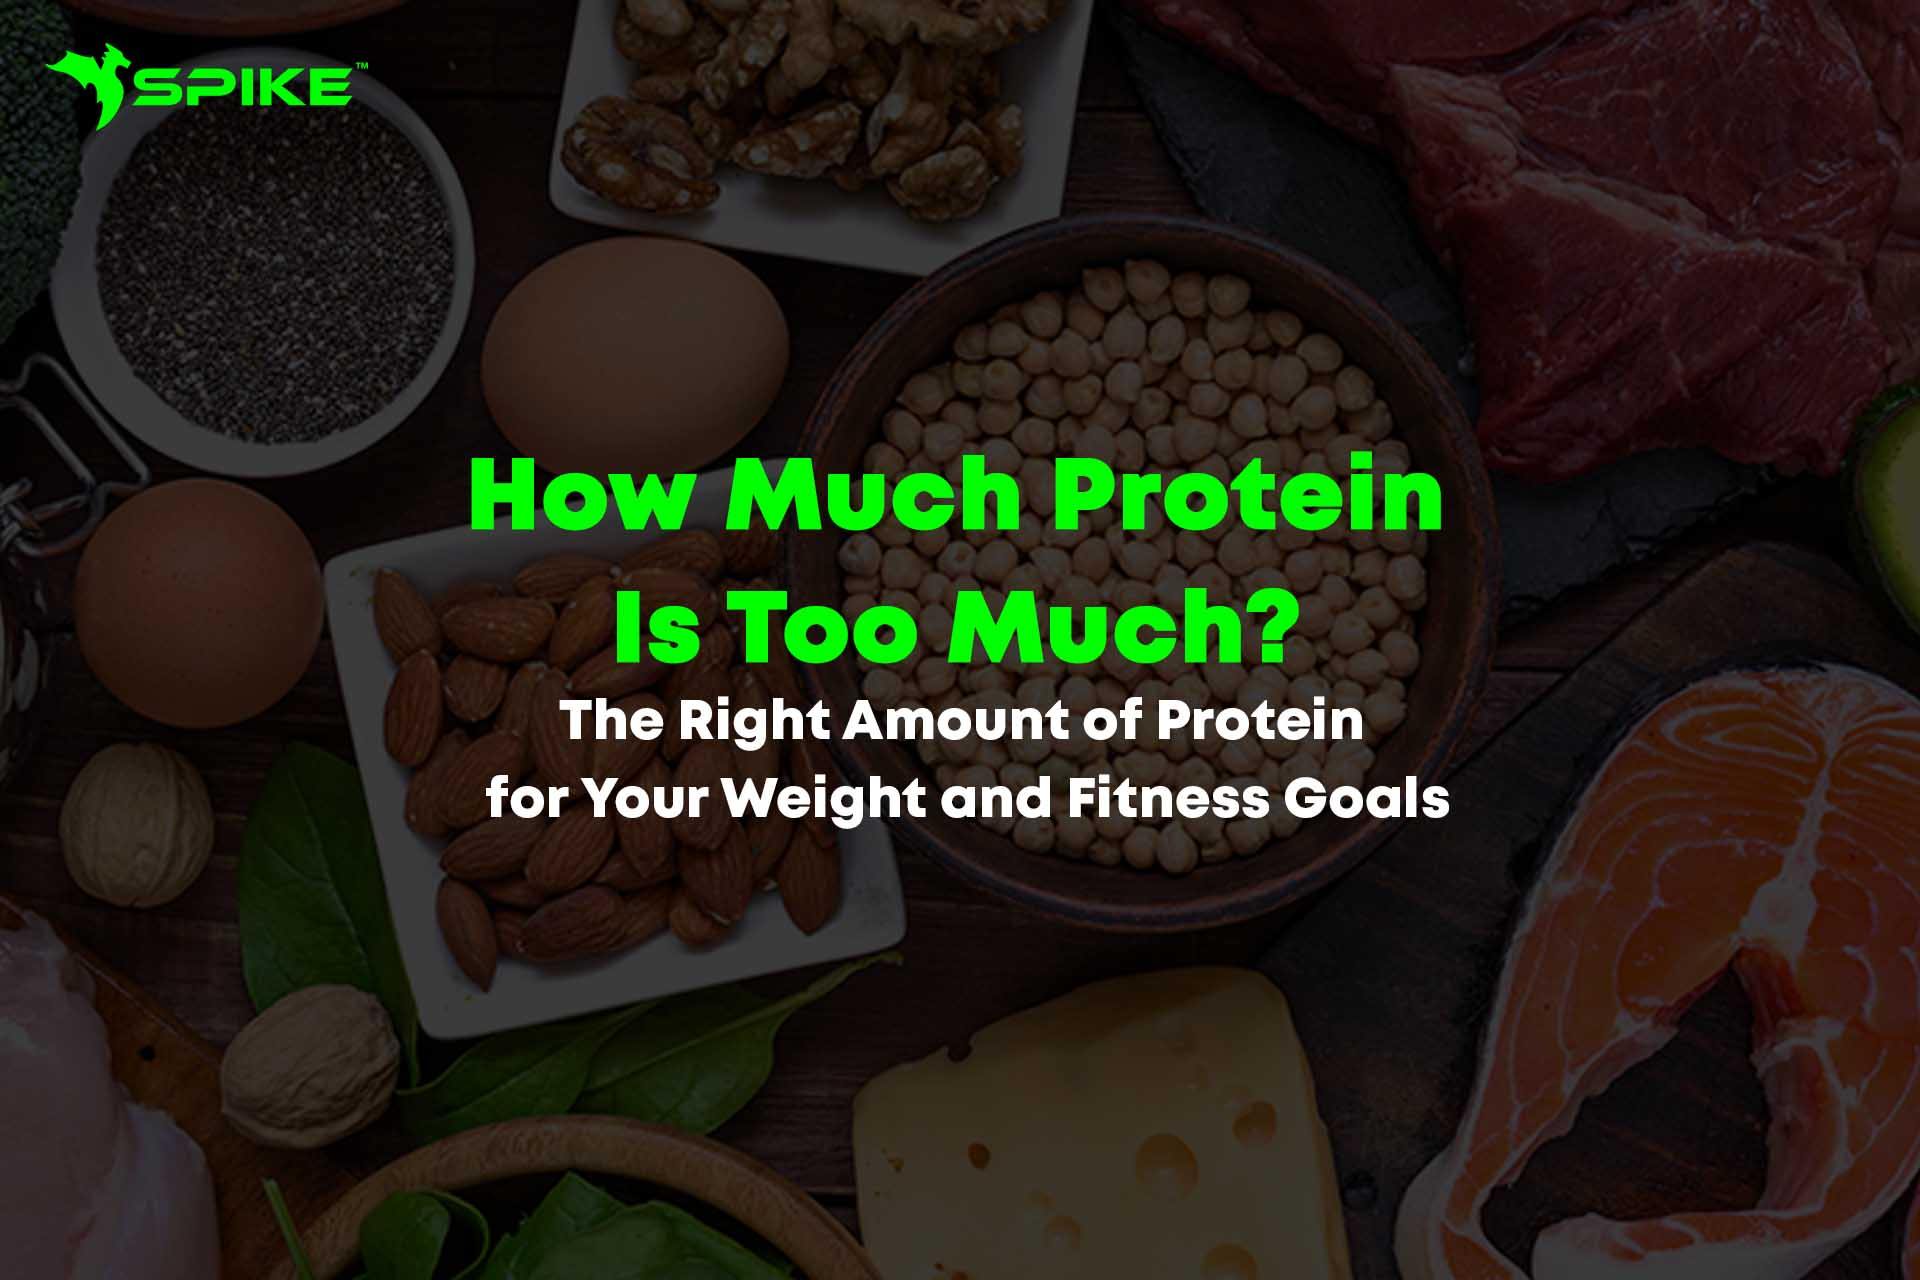 How Much Protein Is Too Much? The Right Amount of Protein for Your Weight and Fitness Goals - Spike